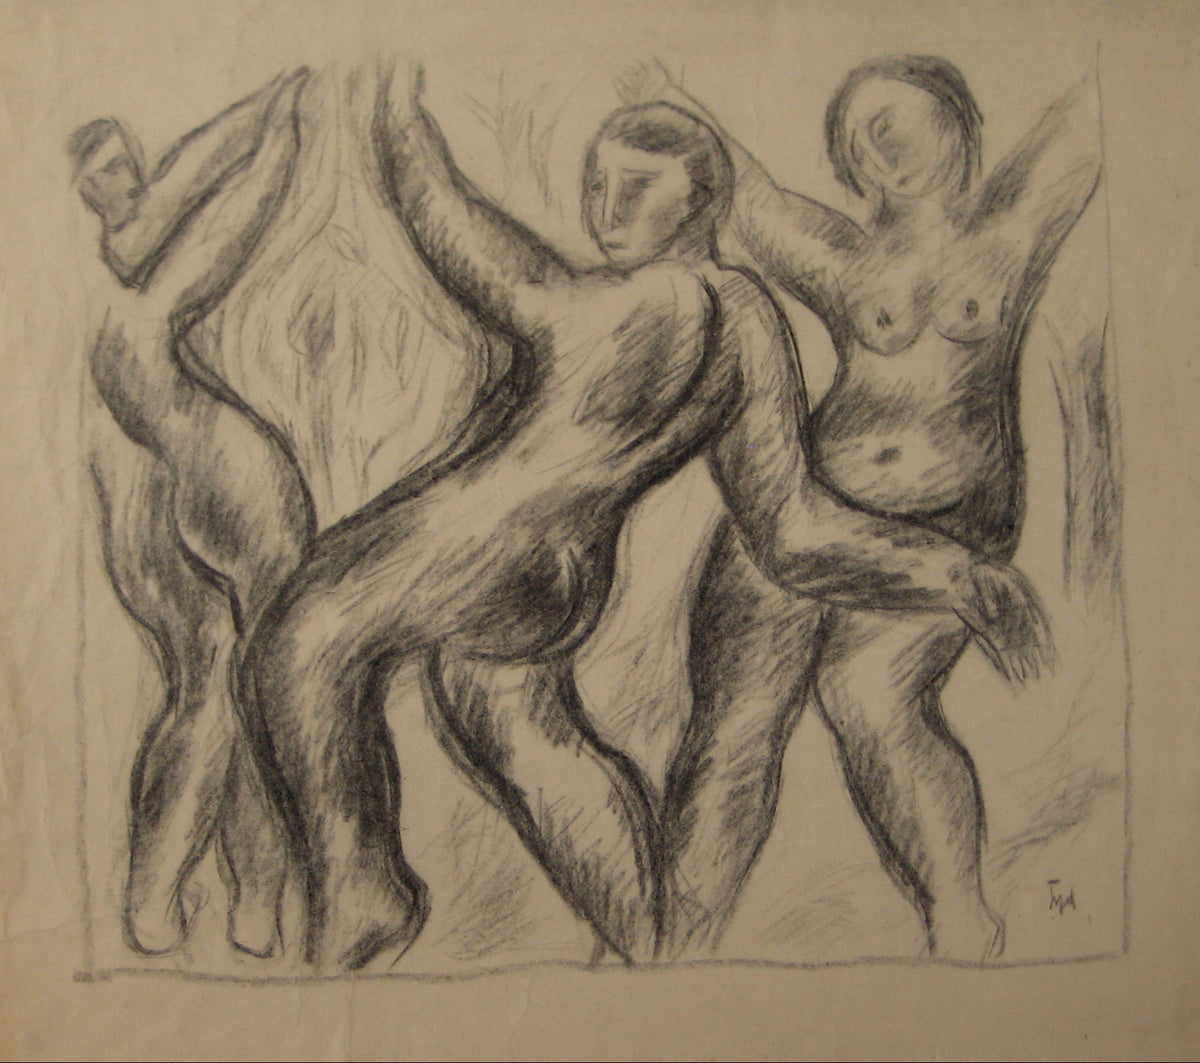 Expressionist Abstracted Figures&lt;br&gt;Early-Mid 20th Century Charcoal on Paper&lt;br&gt;&lt;br&gt;#14358